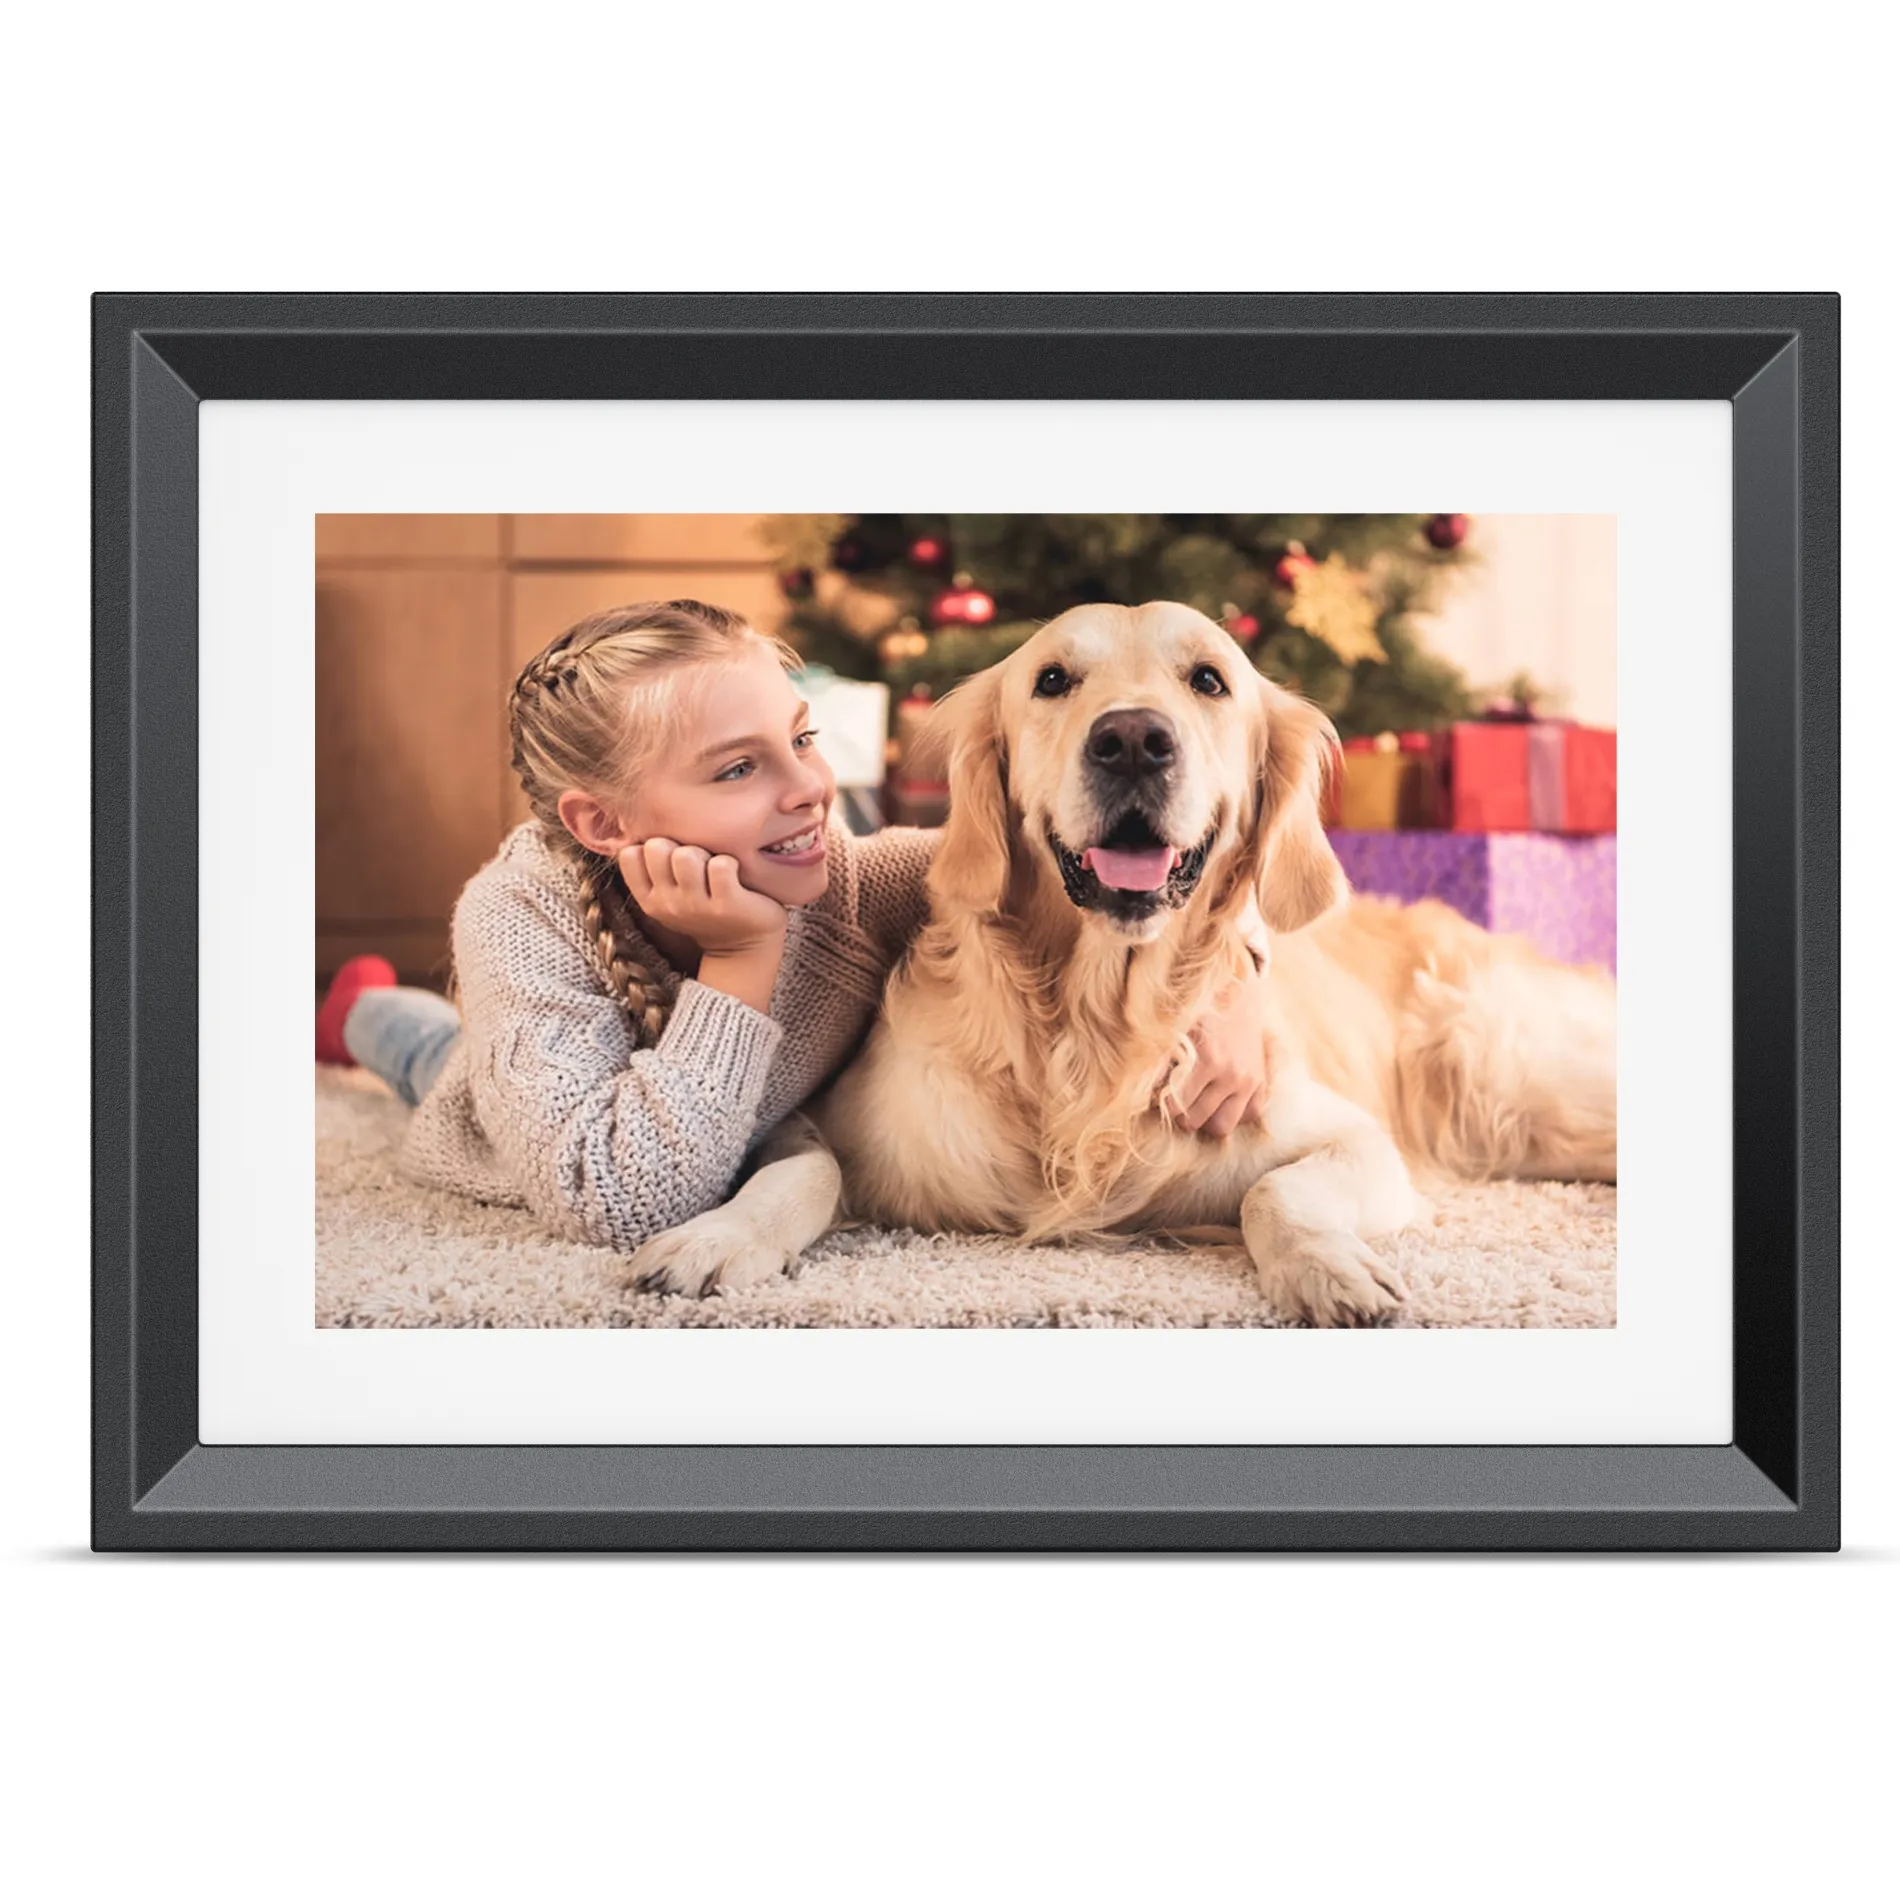 New Design Customized Digital Photo Frame Video Free Download 10 Inch Digital Picture Frames